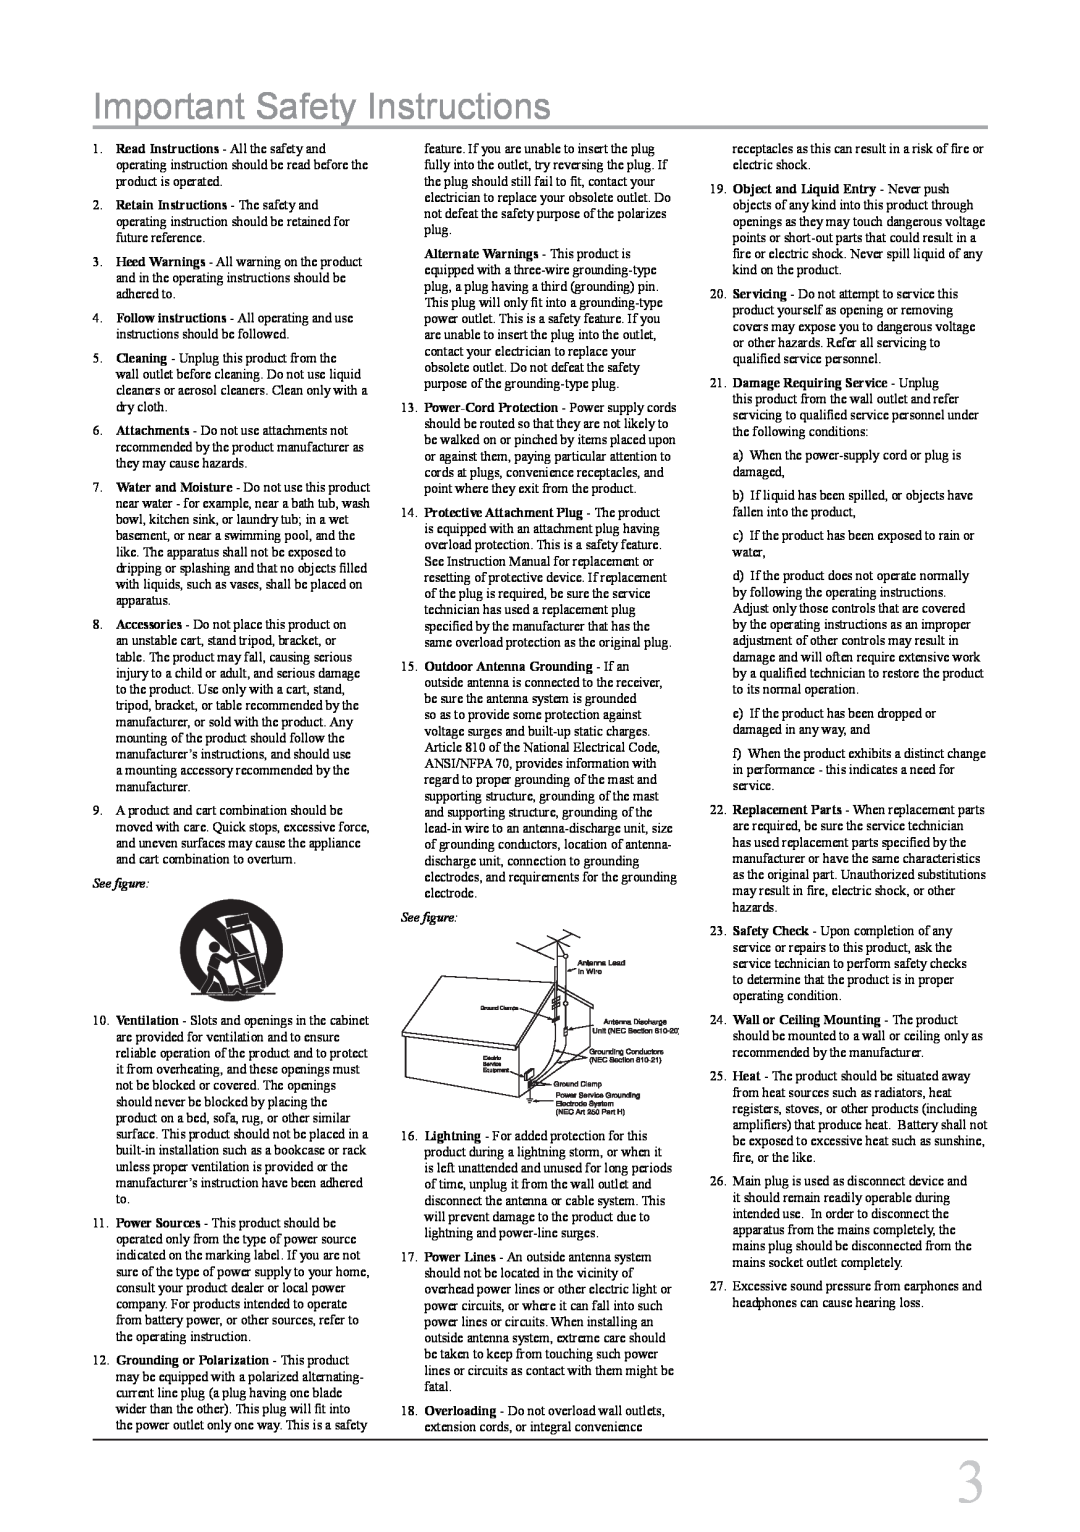 GPX PC108B instruction manual Important Safety Instructions, See figure 